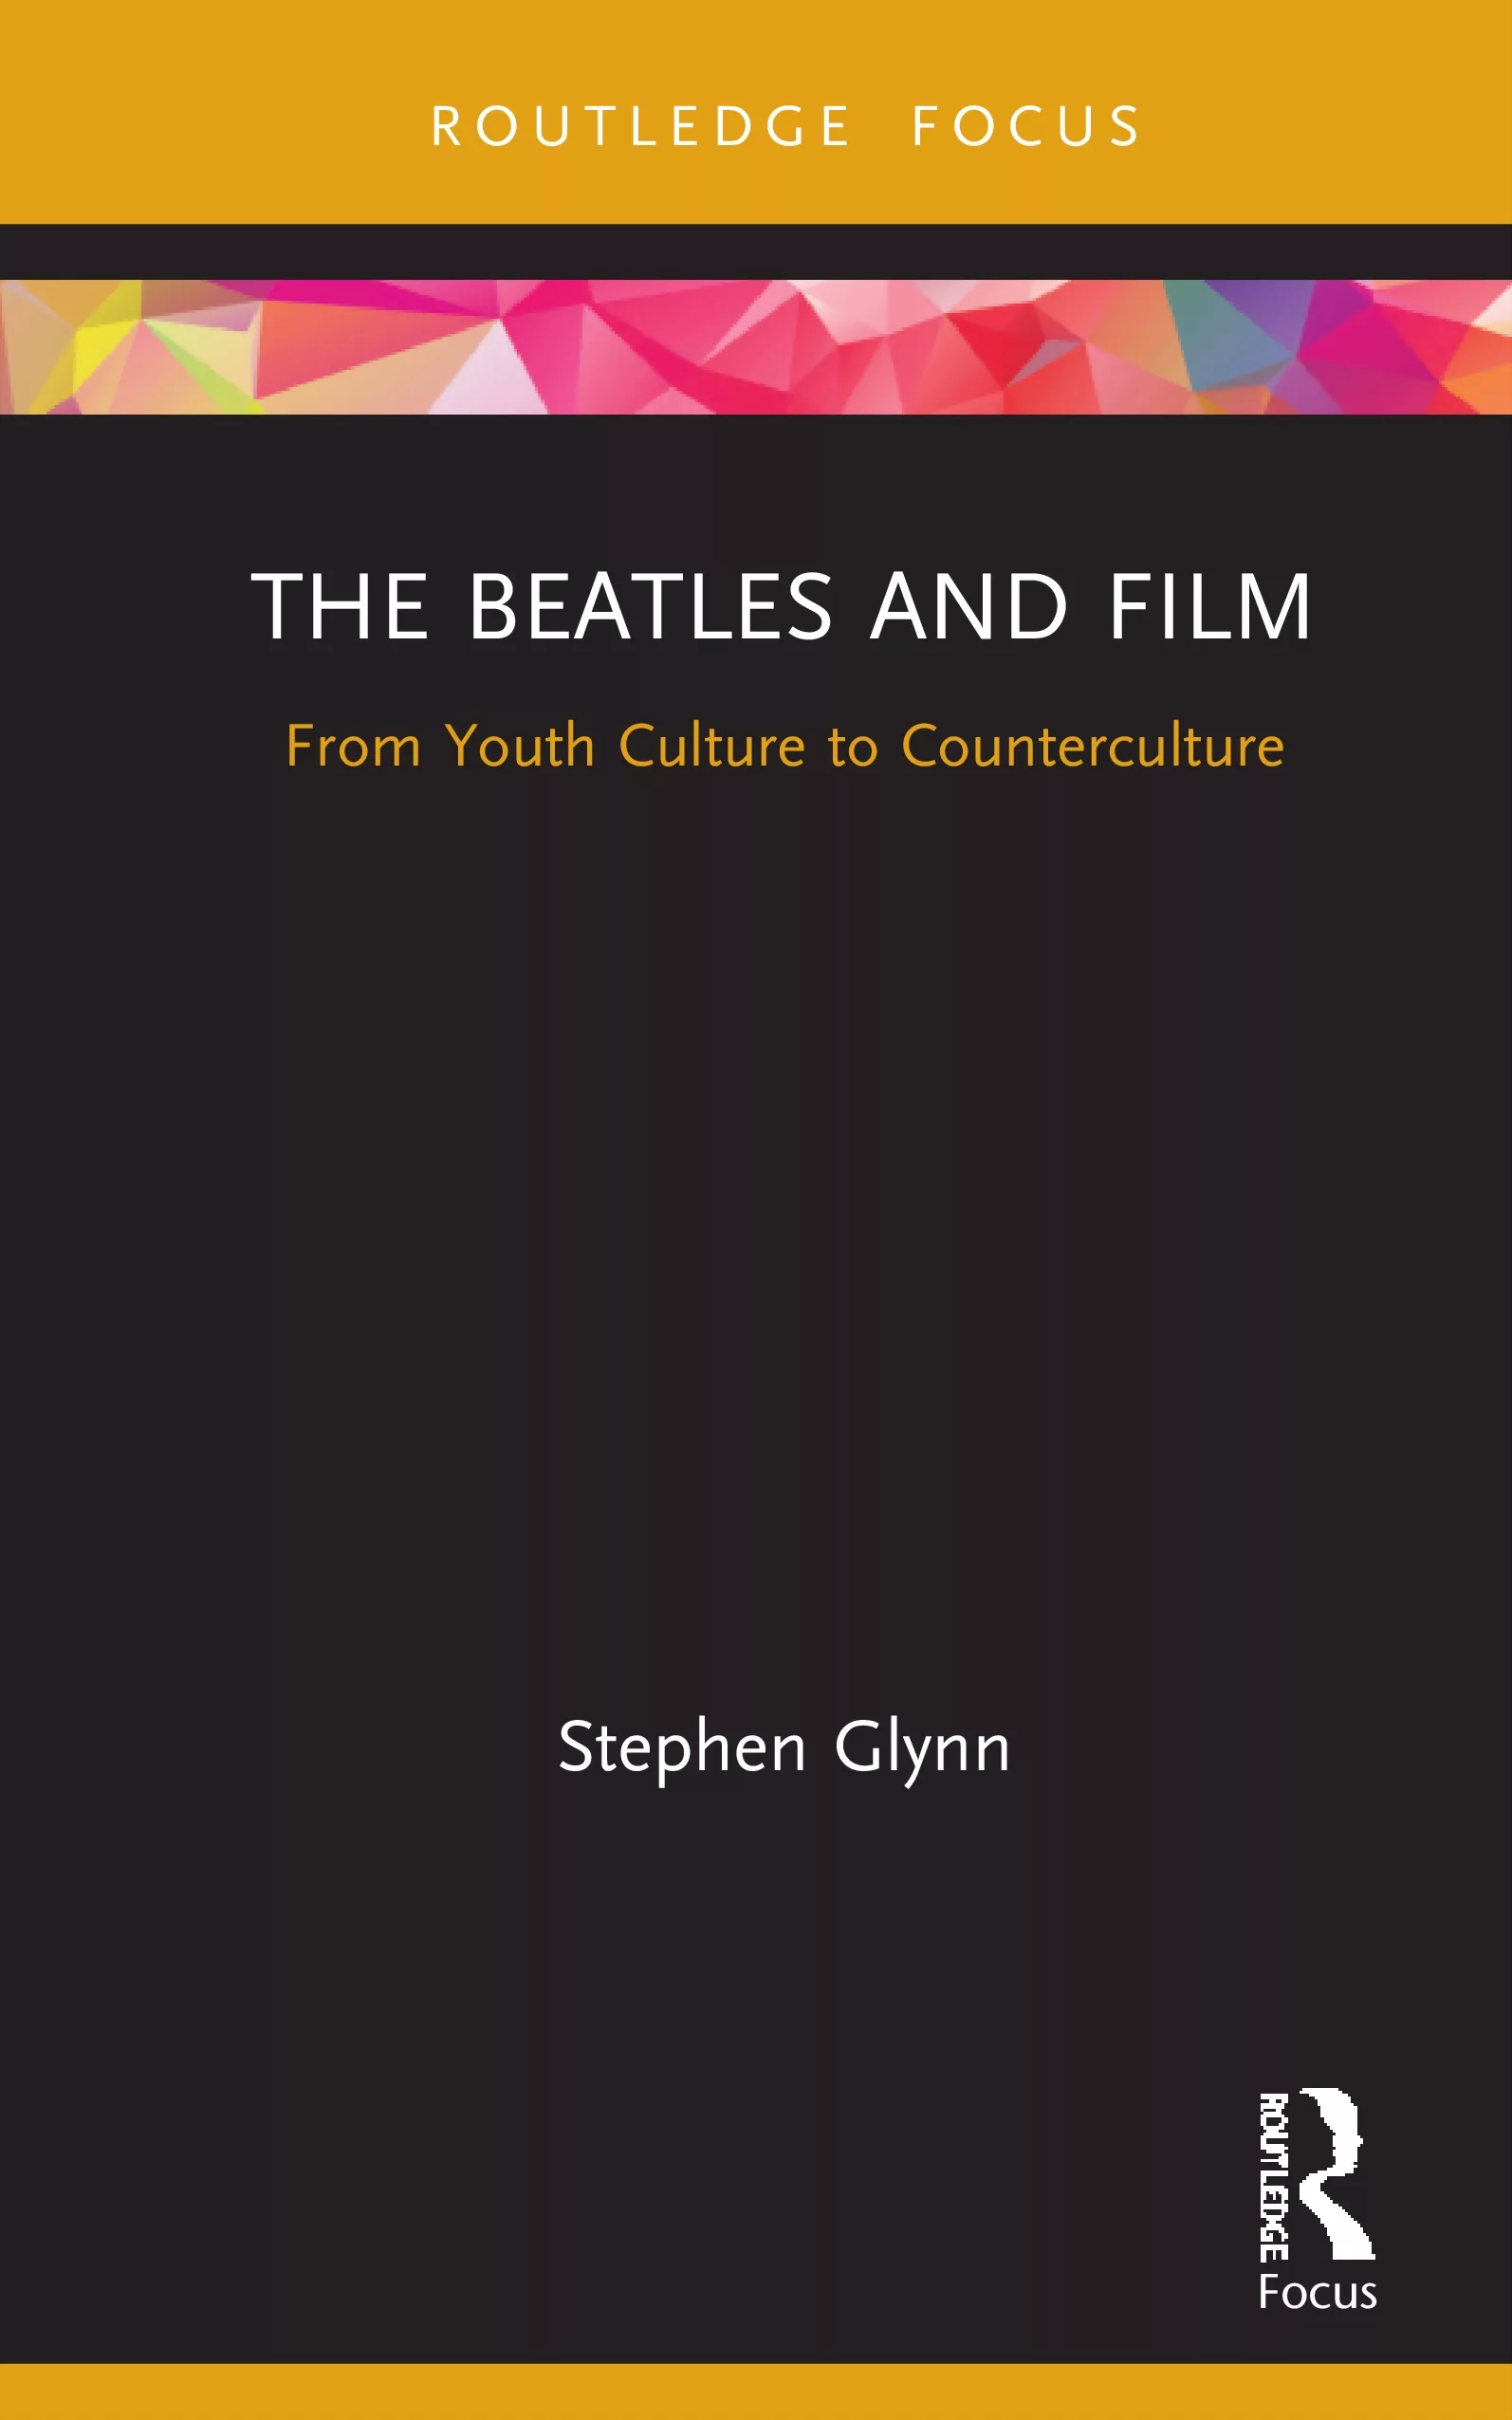 The Beatles: From Youth Culture to Counterculture